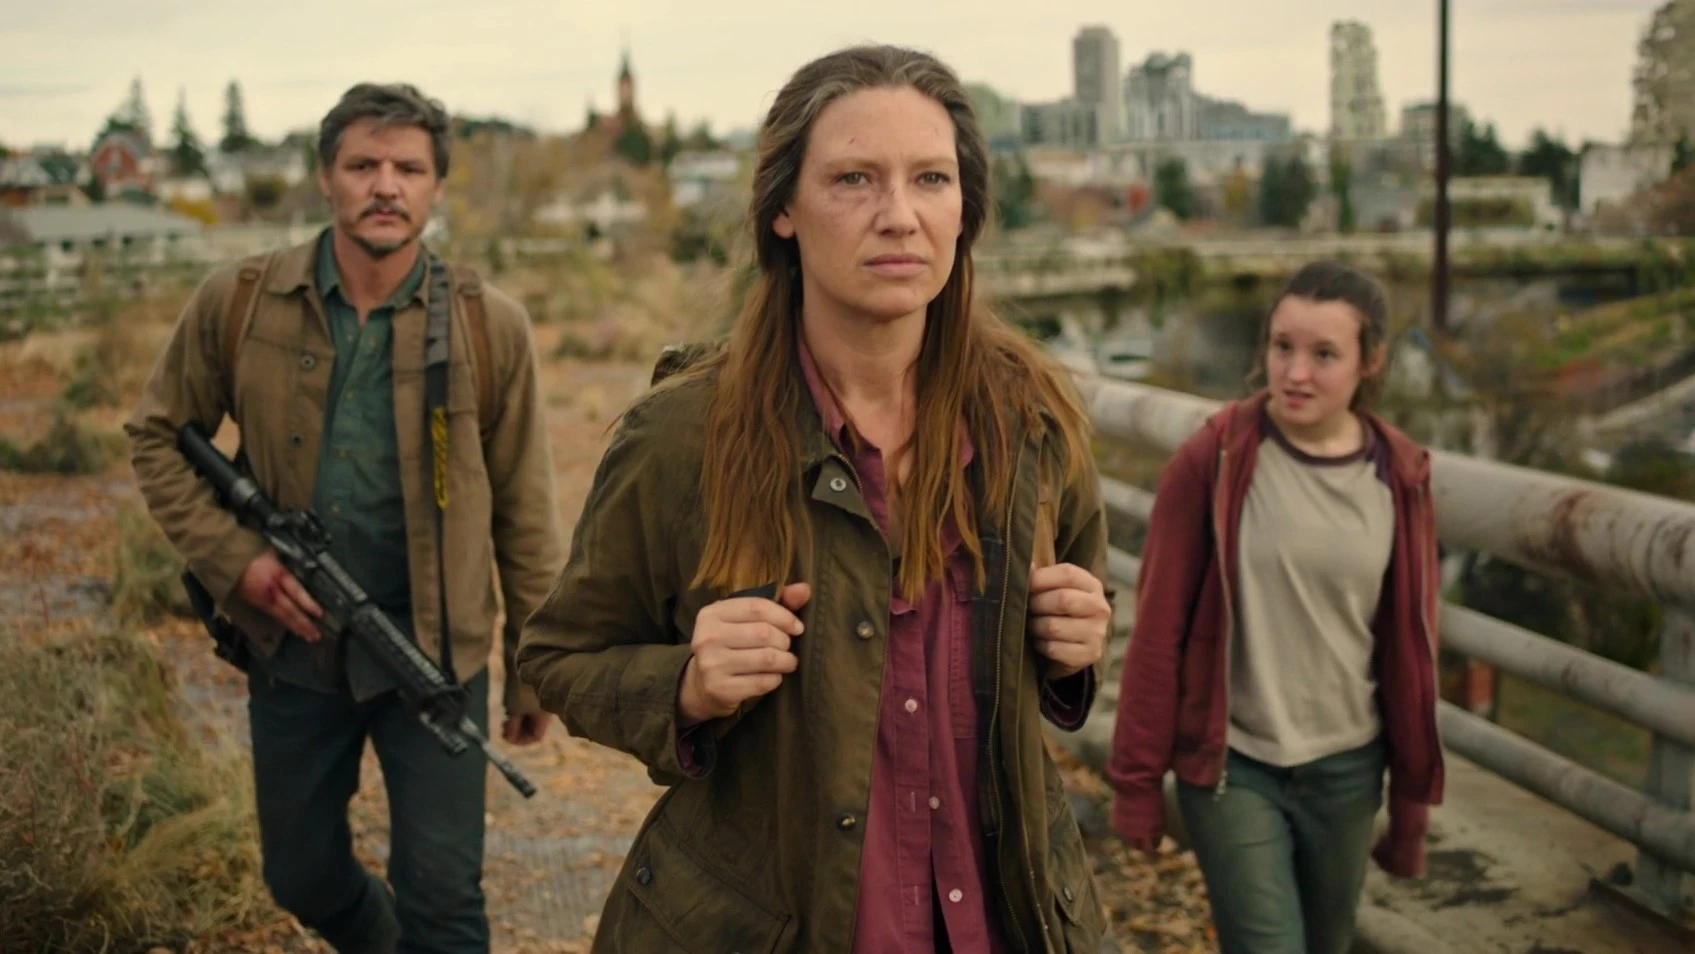 The Last of Us Episode 6: Production Crew Make an Accidental Appearance in  Pedro Pascal, Bella Ramsey's HBO Series (View Pic)